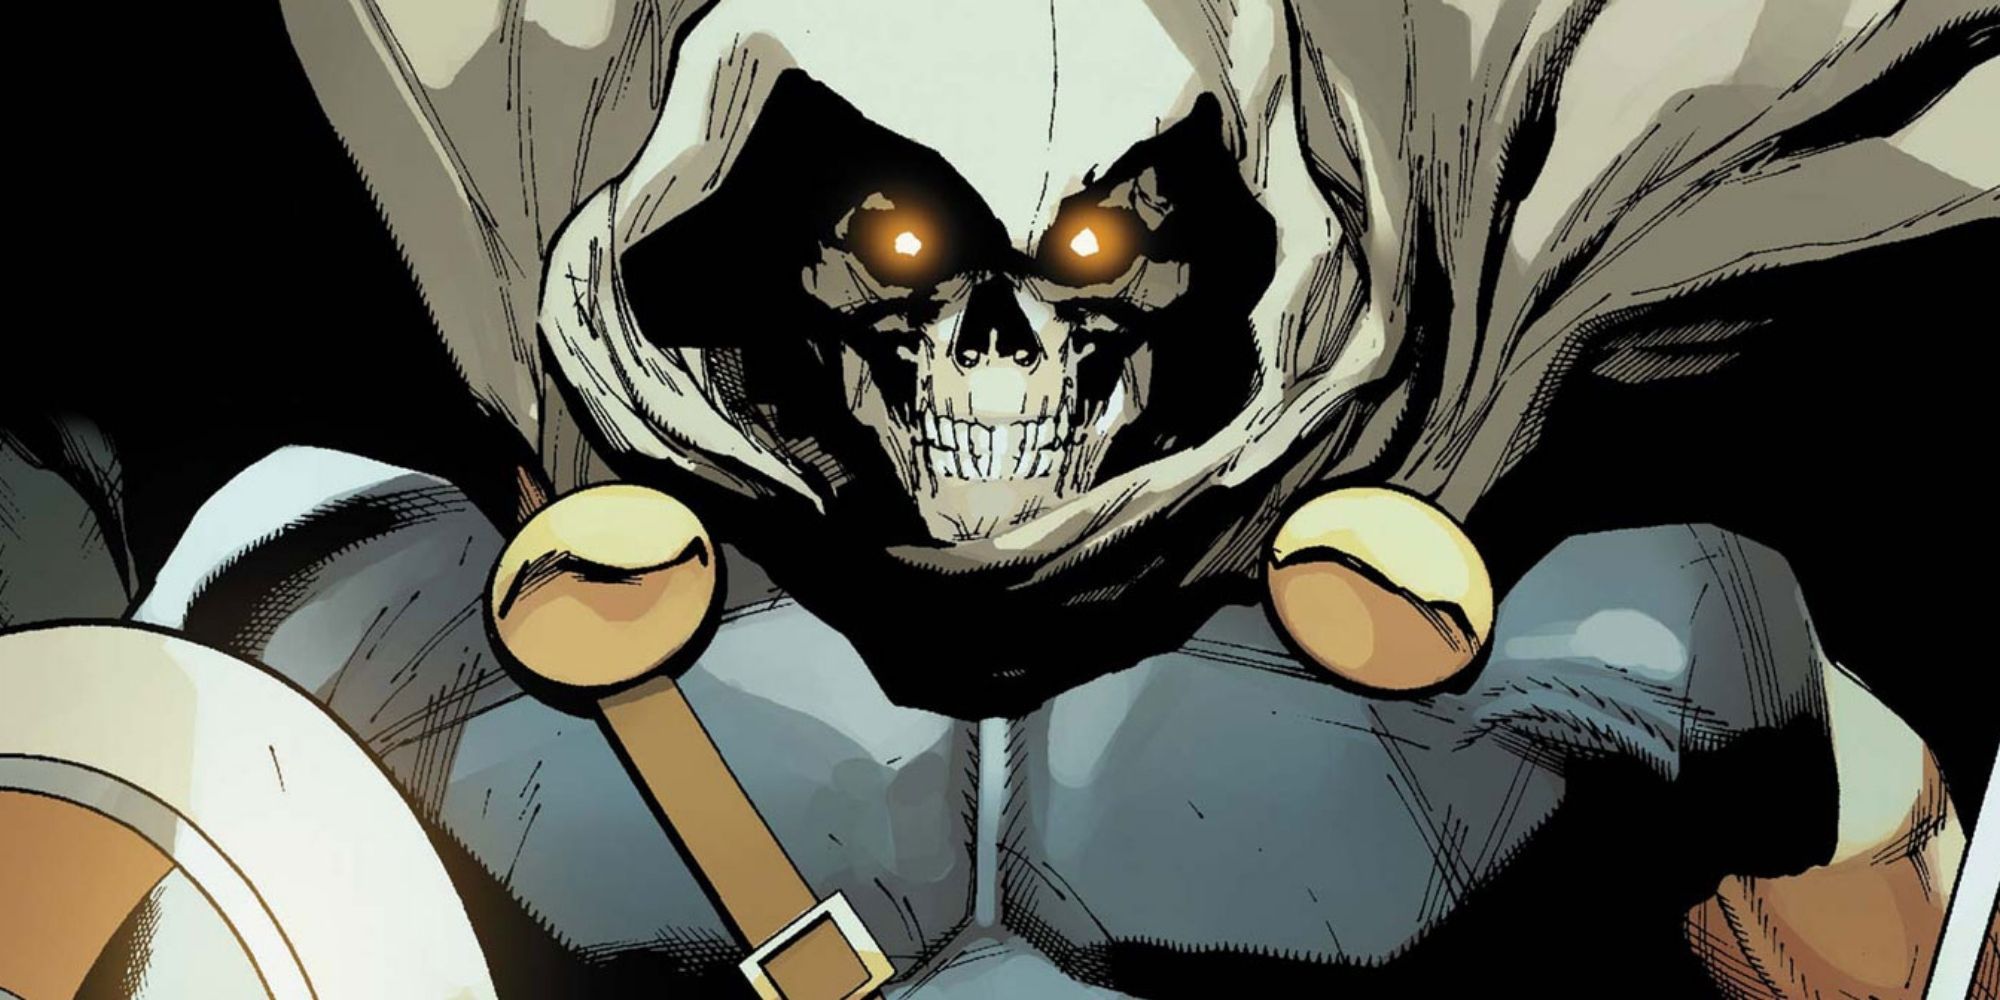 Taskmaster with his eyes glowing